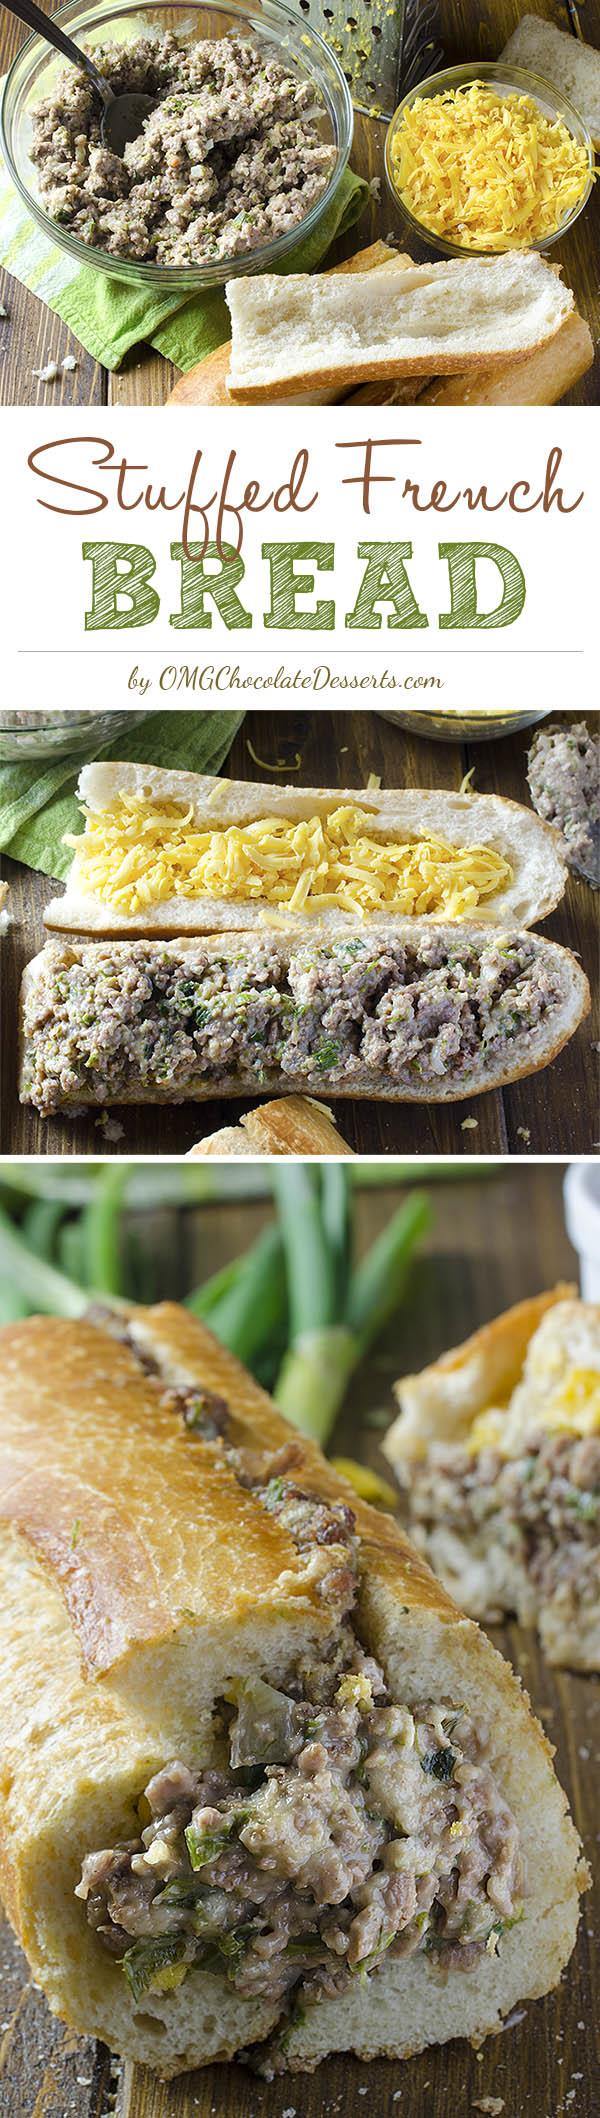 In only half an hour, prepare a quick and tasty dinner for your family! Stuffed French Bread is a quick and a simple recipe for a crispy loaf of bread stuffed with cheesy minced beef